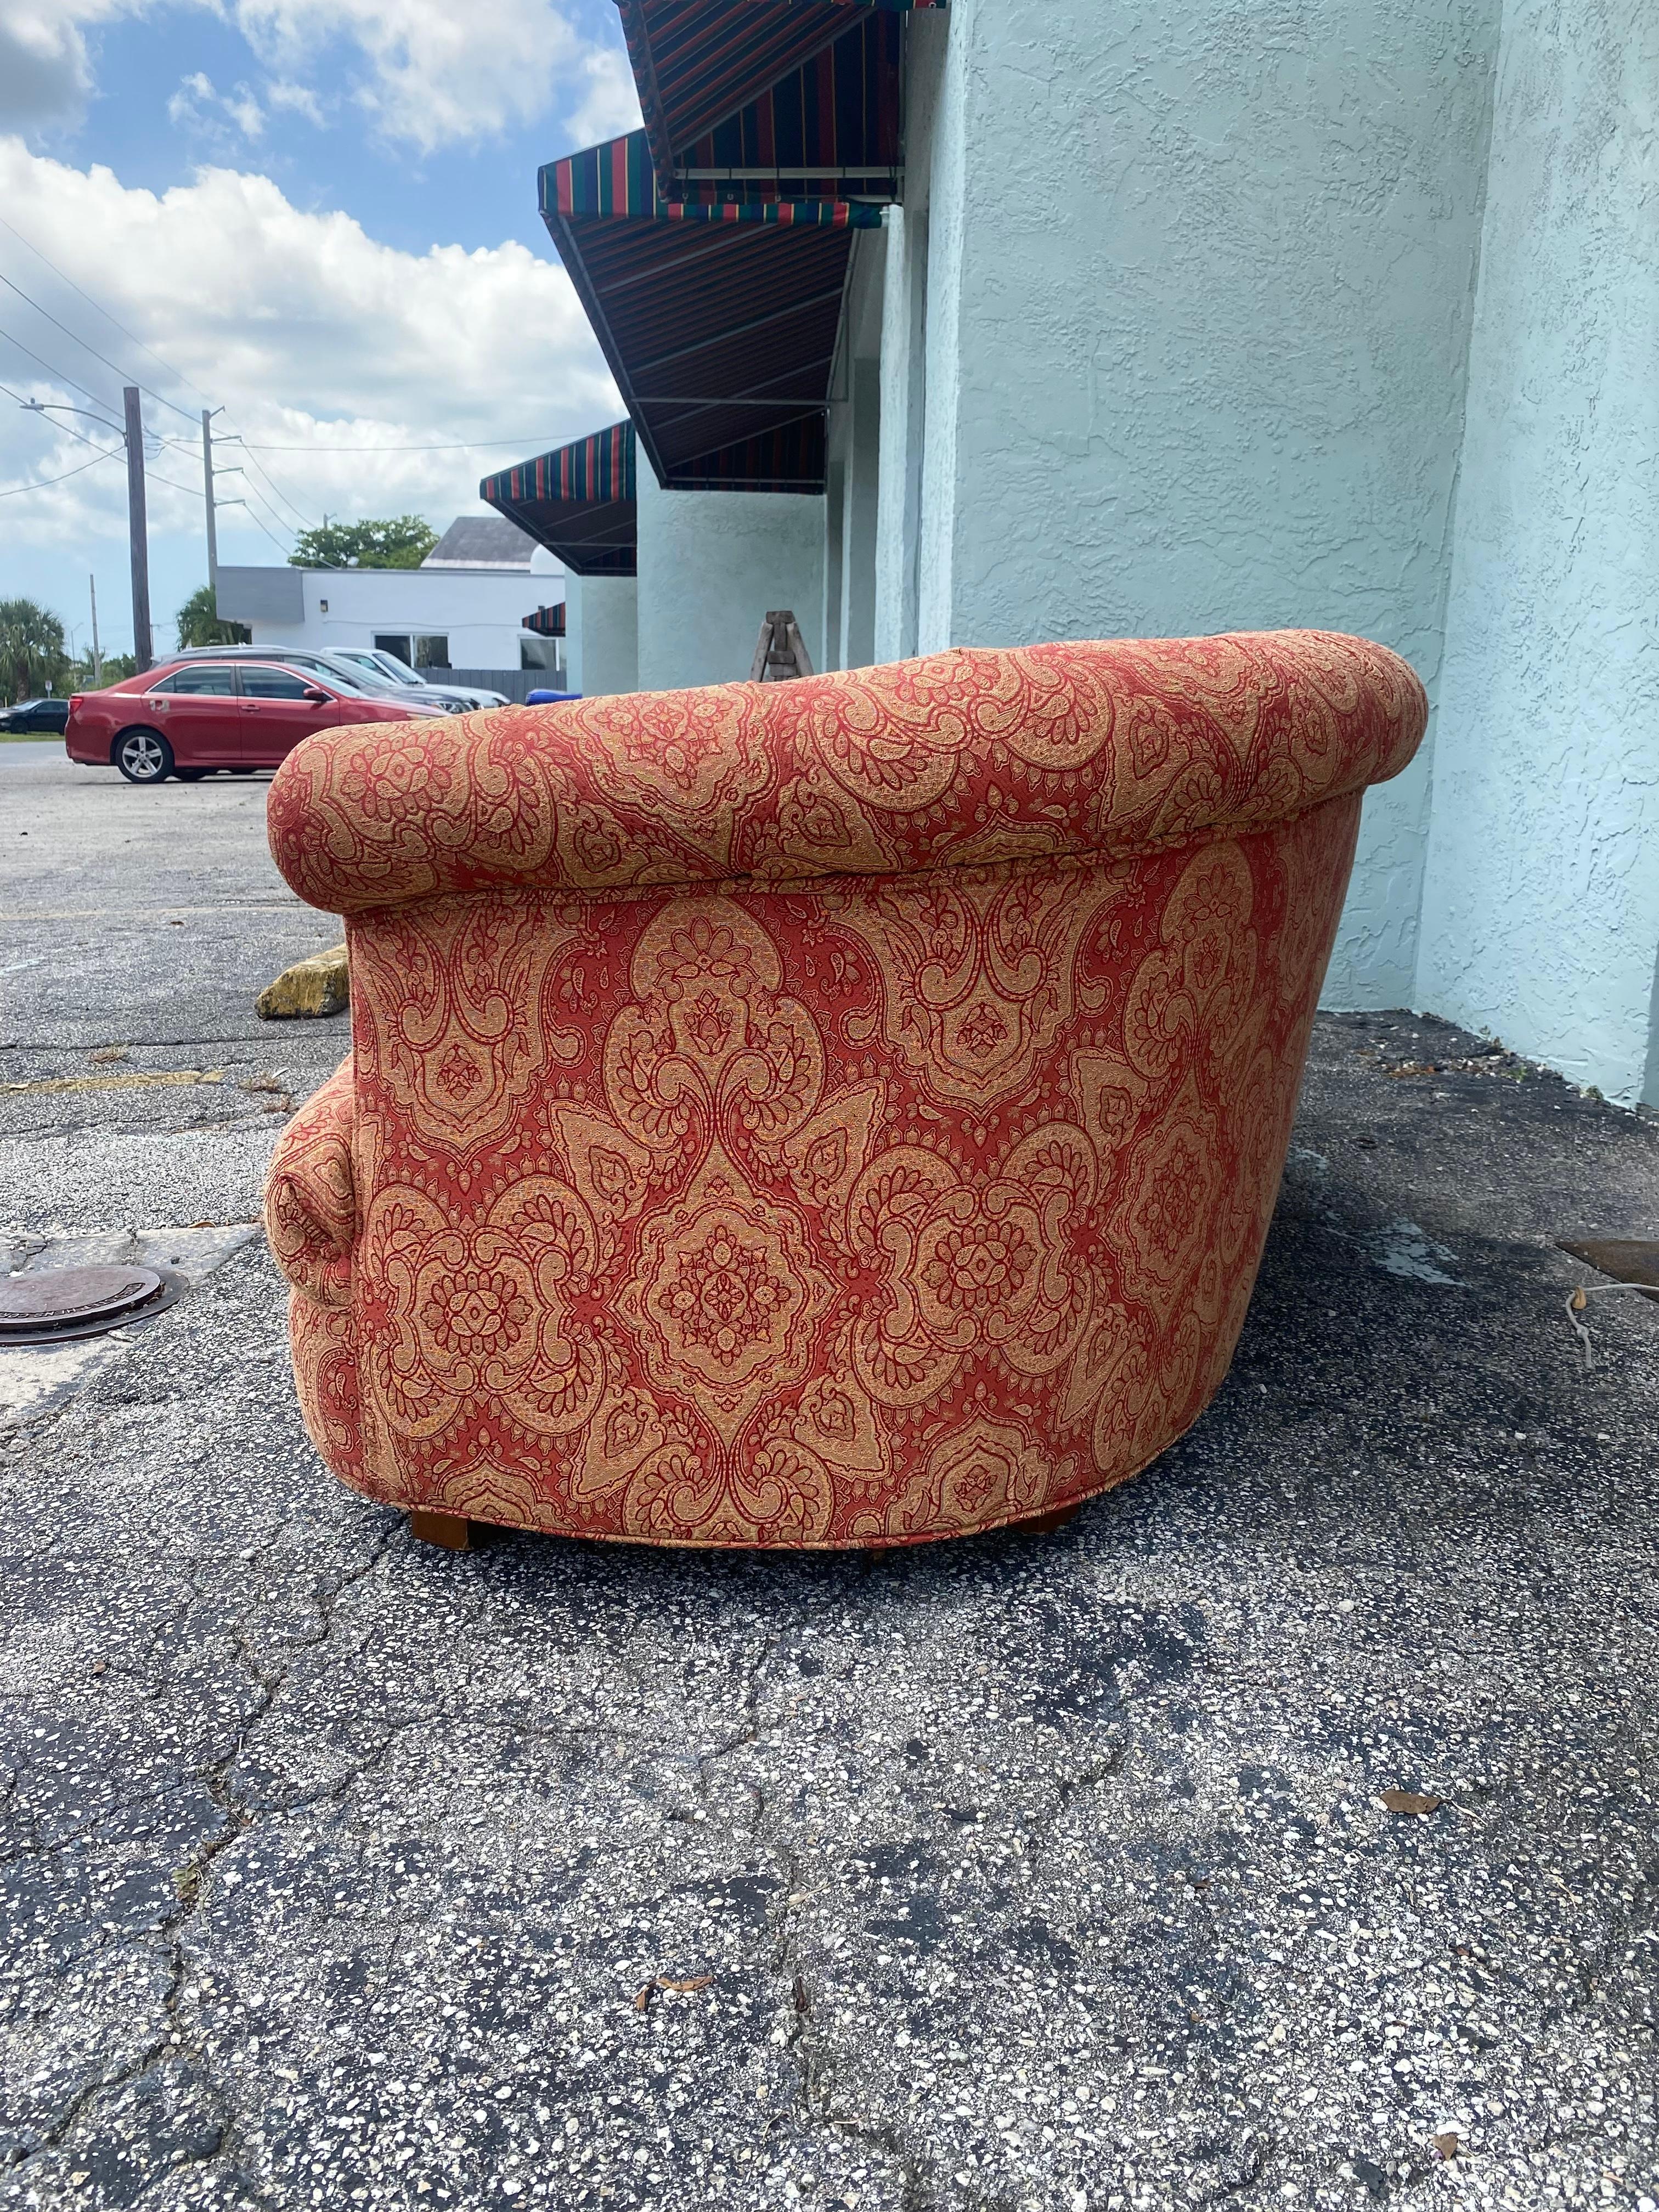 1960s Mid Century Curved Tufted Paisley Chesterfield Kidney Sofa In Good Condition For Sale In Fort Lauderdale, FL